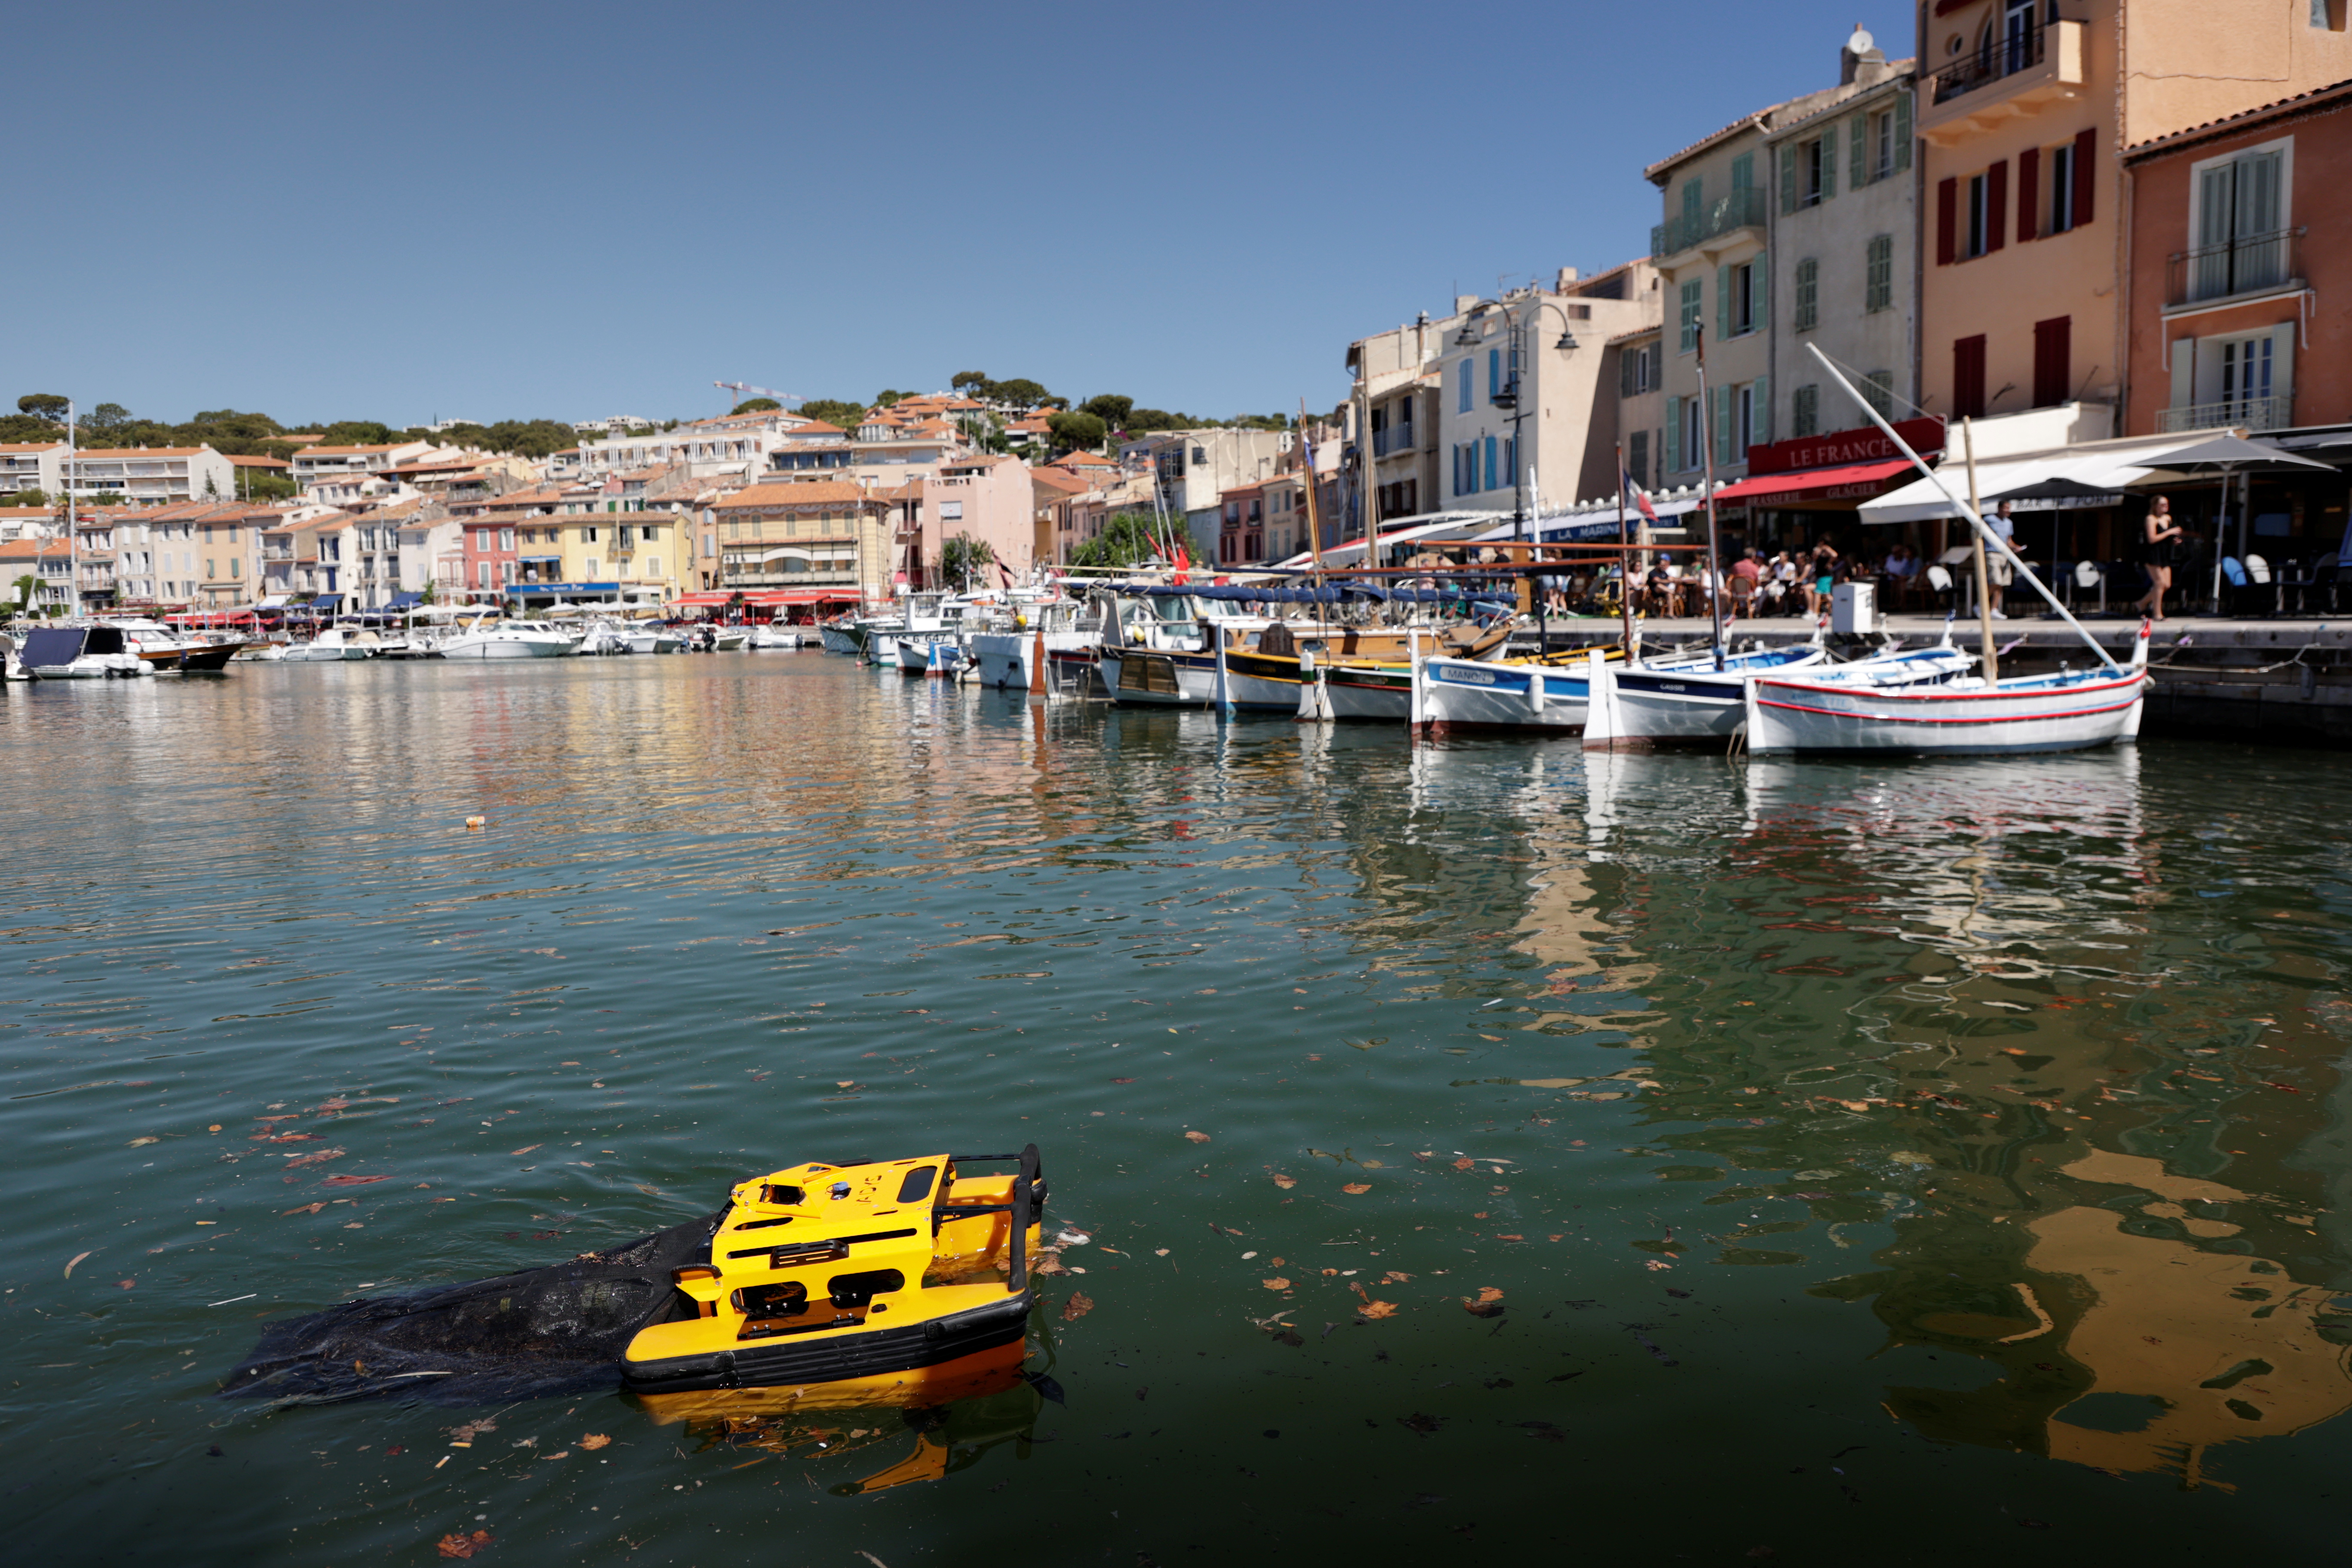 The Jellyfish sea-cleaning remote-controled catamaran is seen at work in the port of Cassis